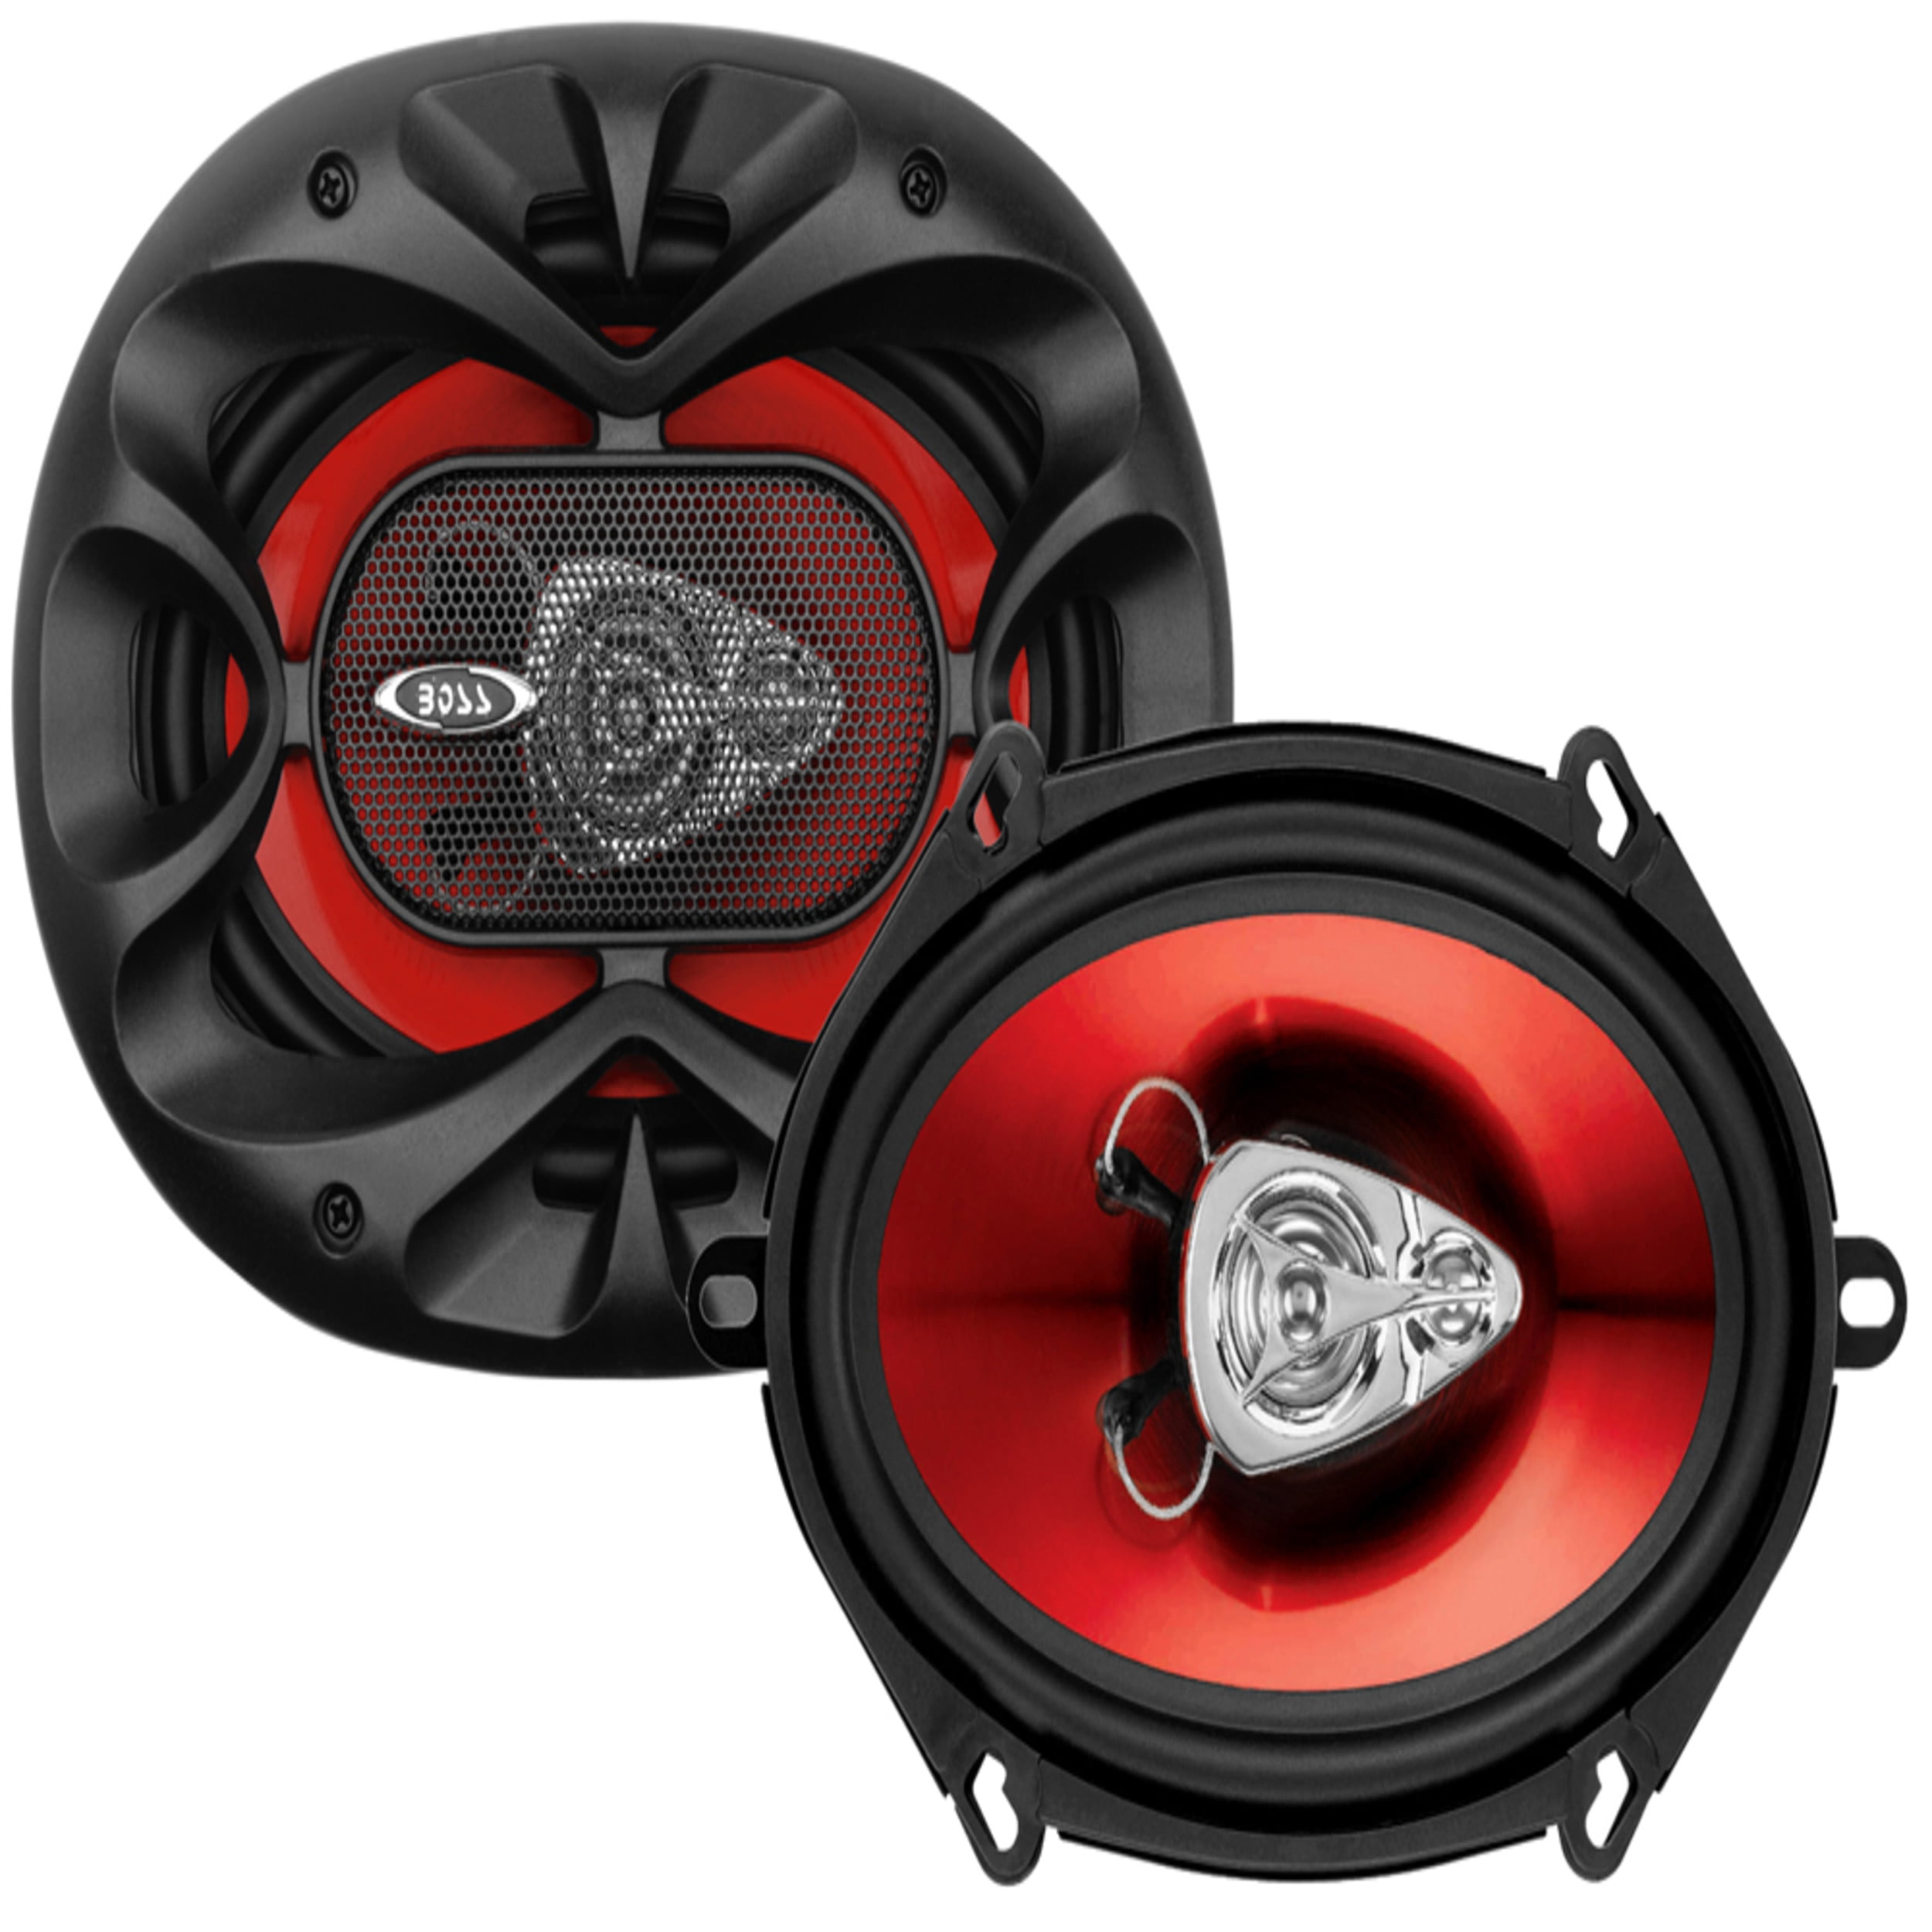 Full Range Replacement Car Speaker Sold Individually BOSS Audio Systems BRS5768 80 Watt 5 x 7 6 x 8 Inch Duo-Fit 